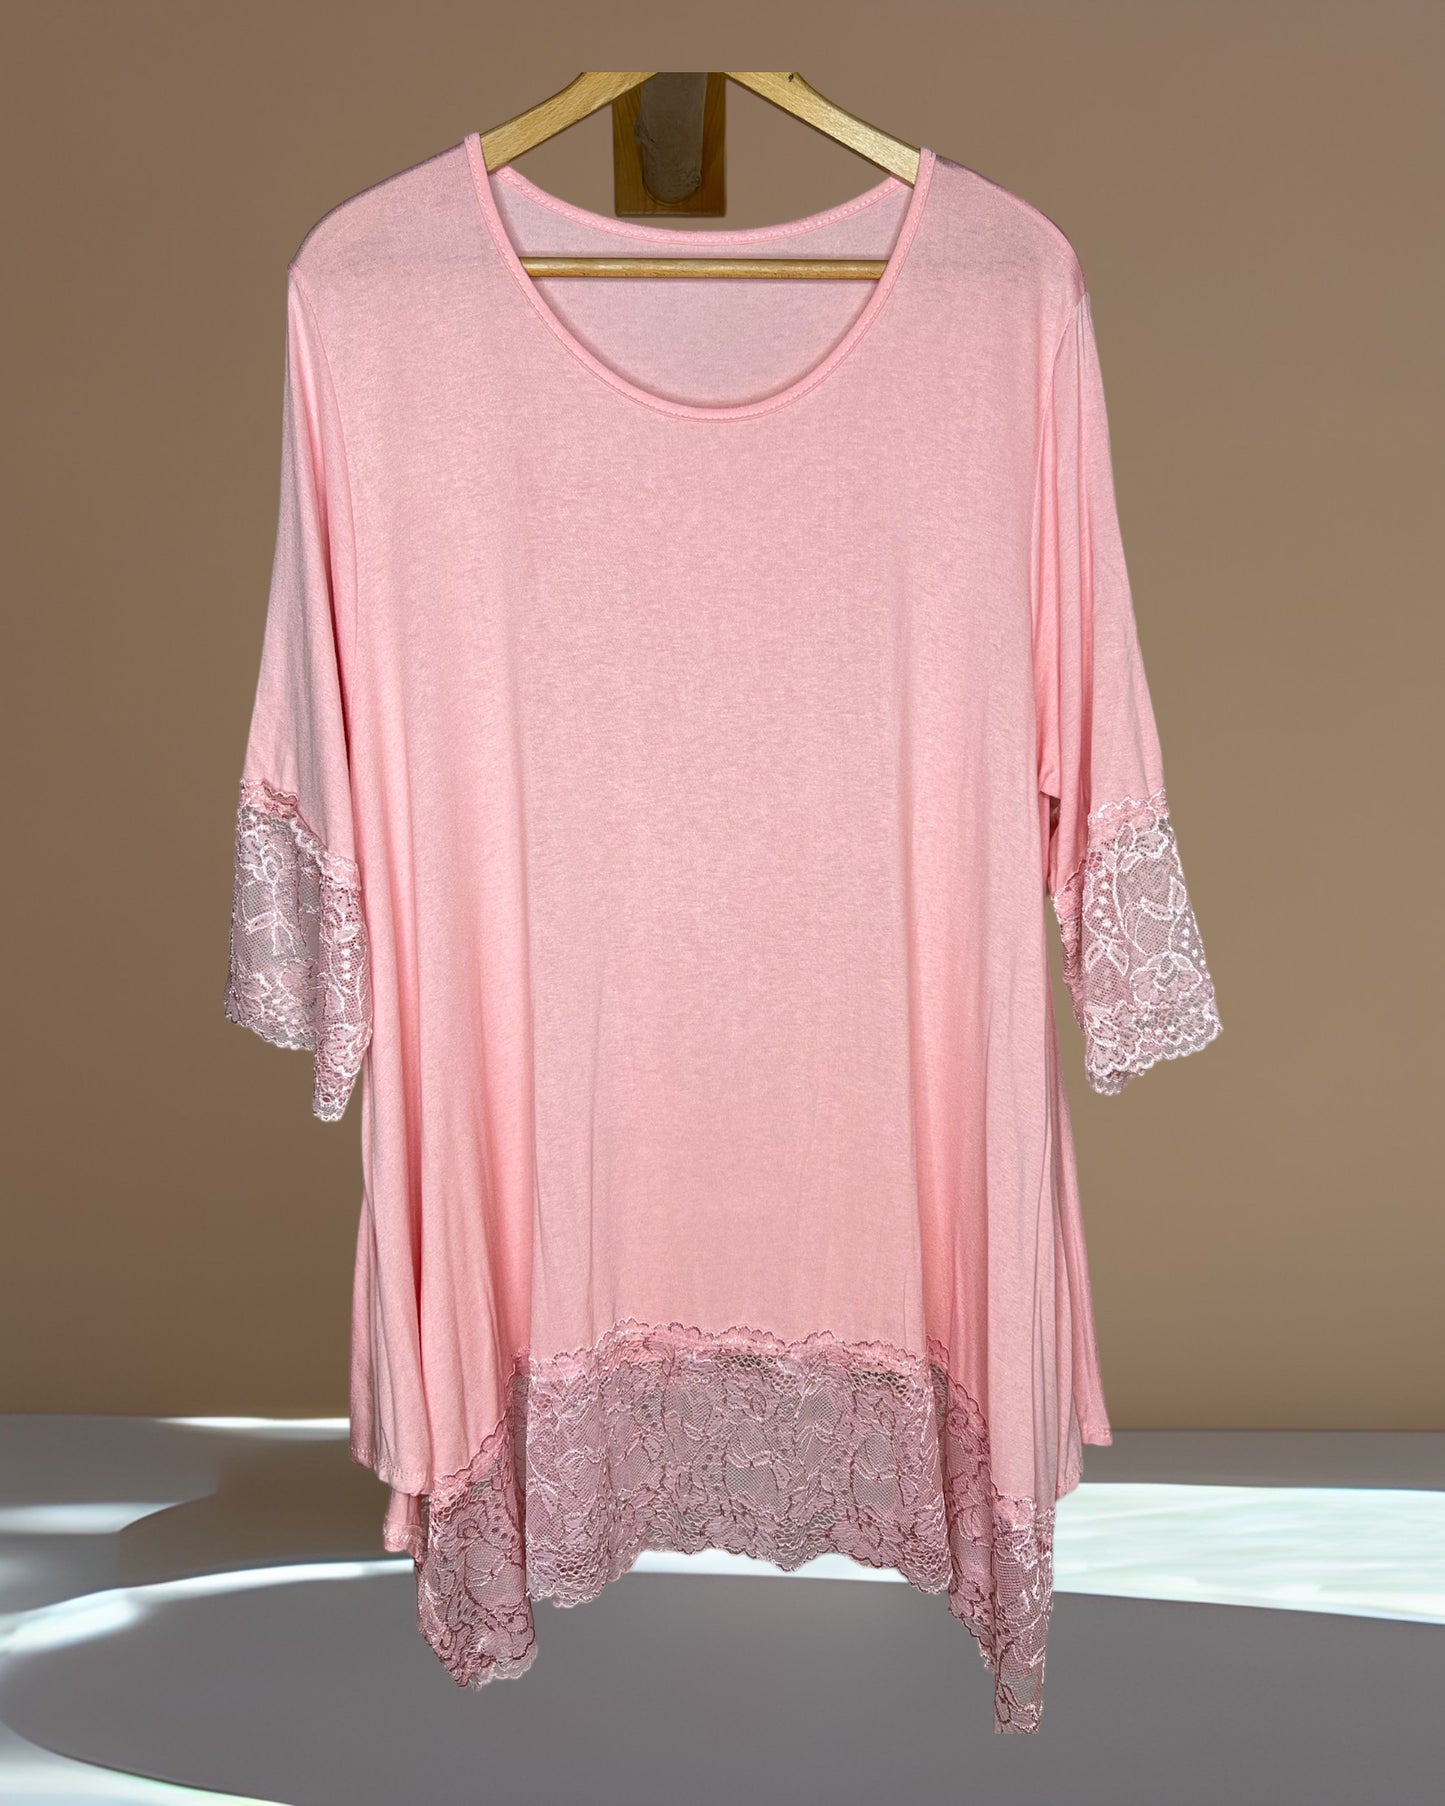 CINDY - TOP ROSE TAILLE 46 A 56/58